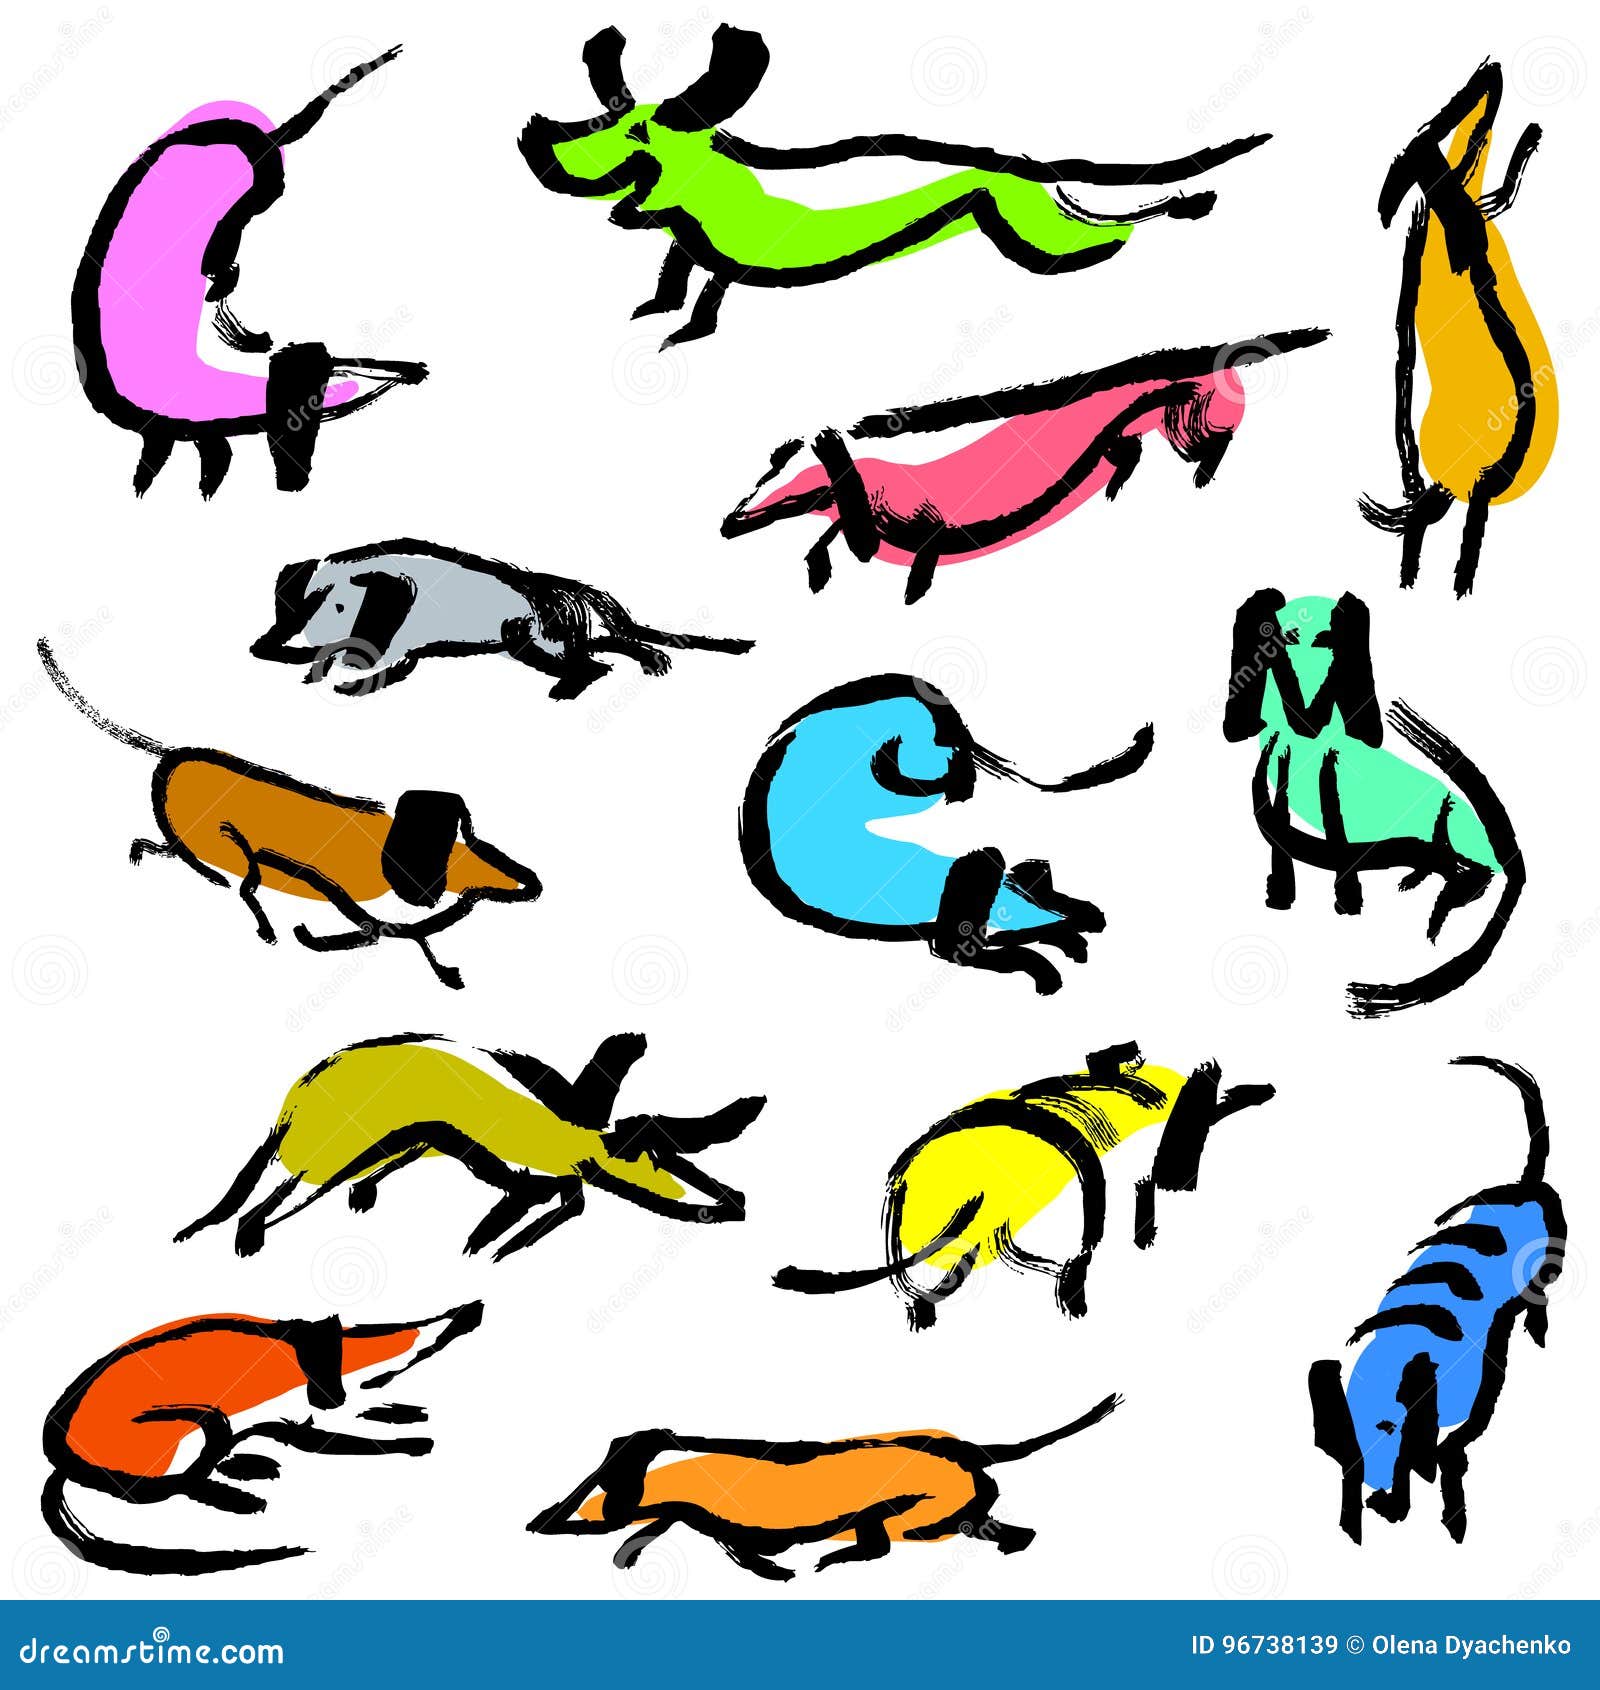 hand drawn doodle dachshund dogs. artistic canine 